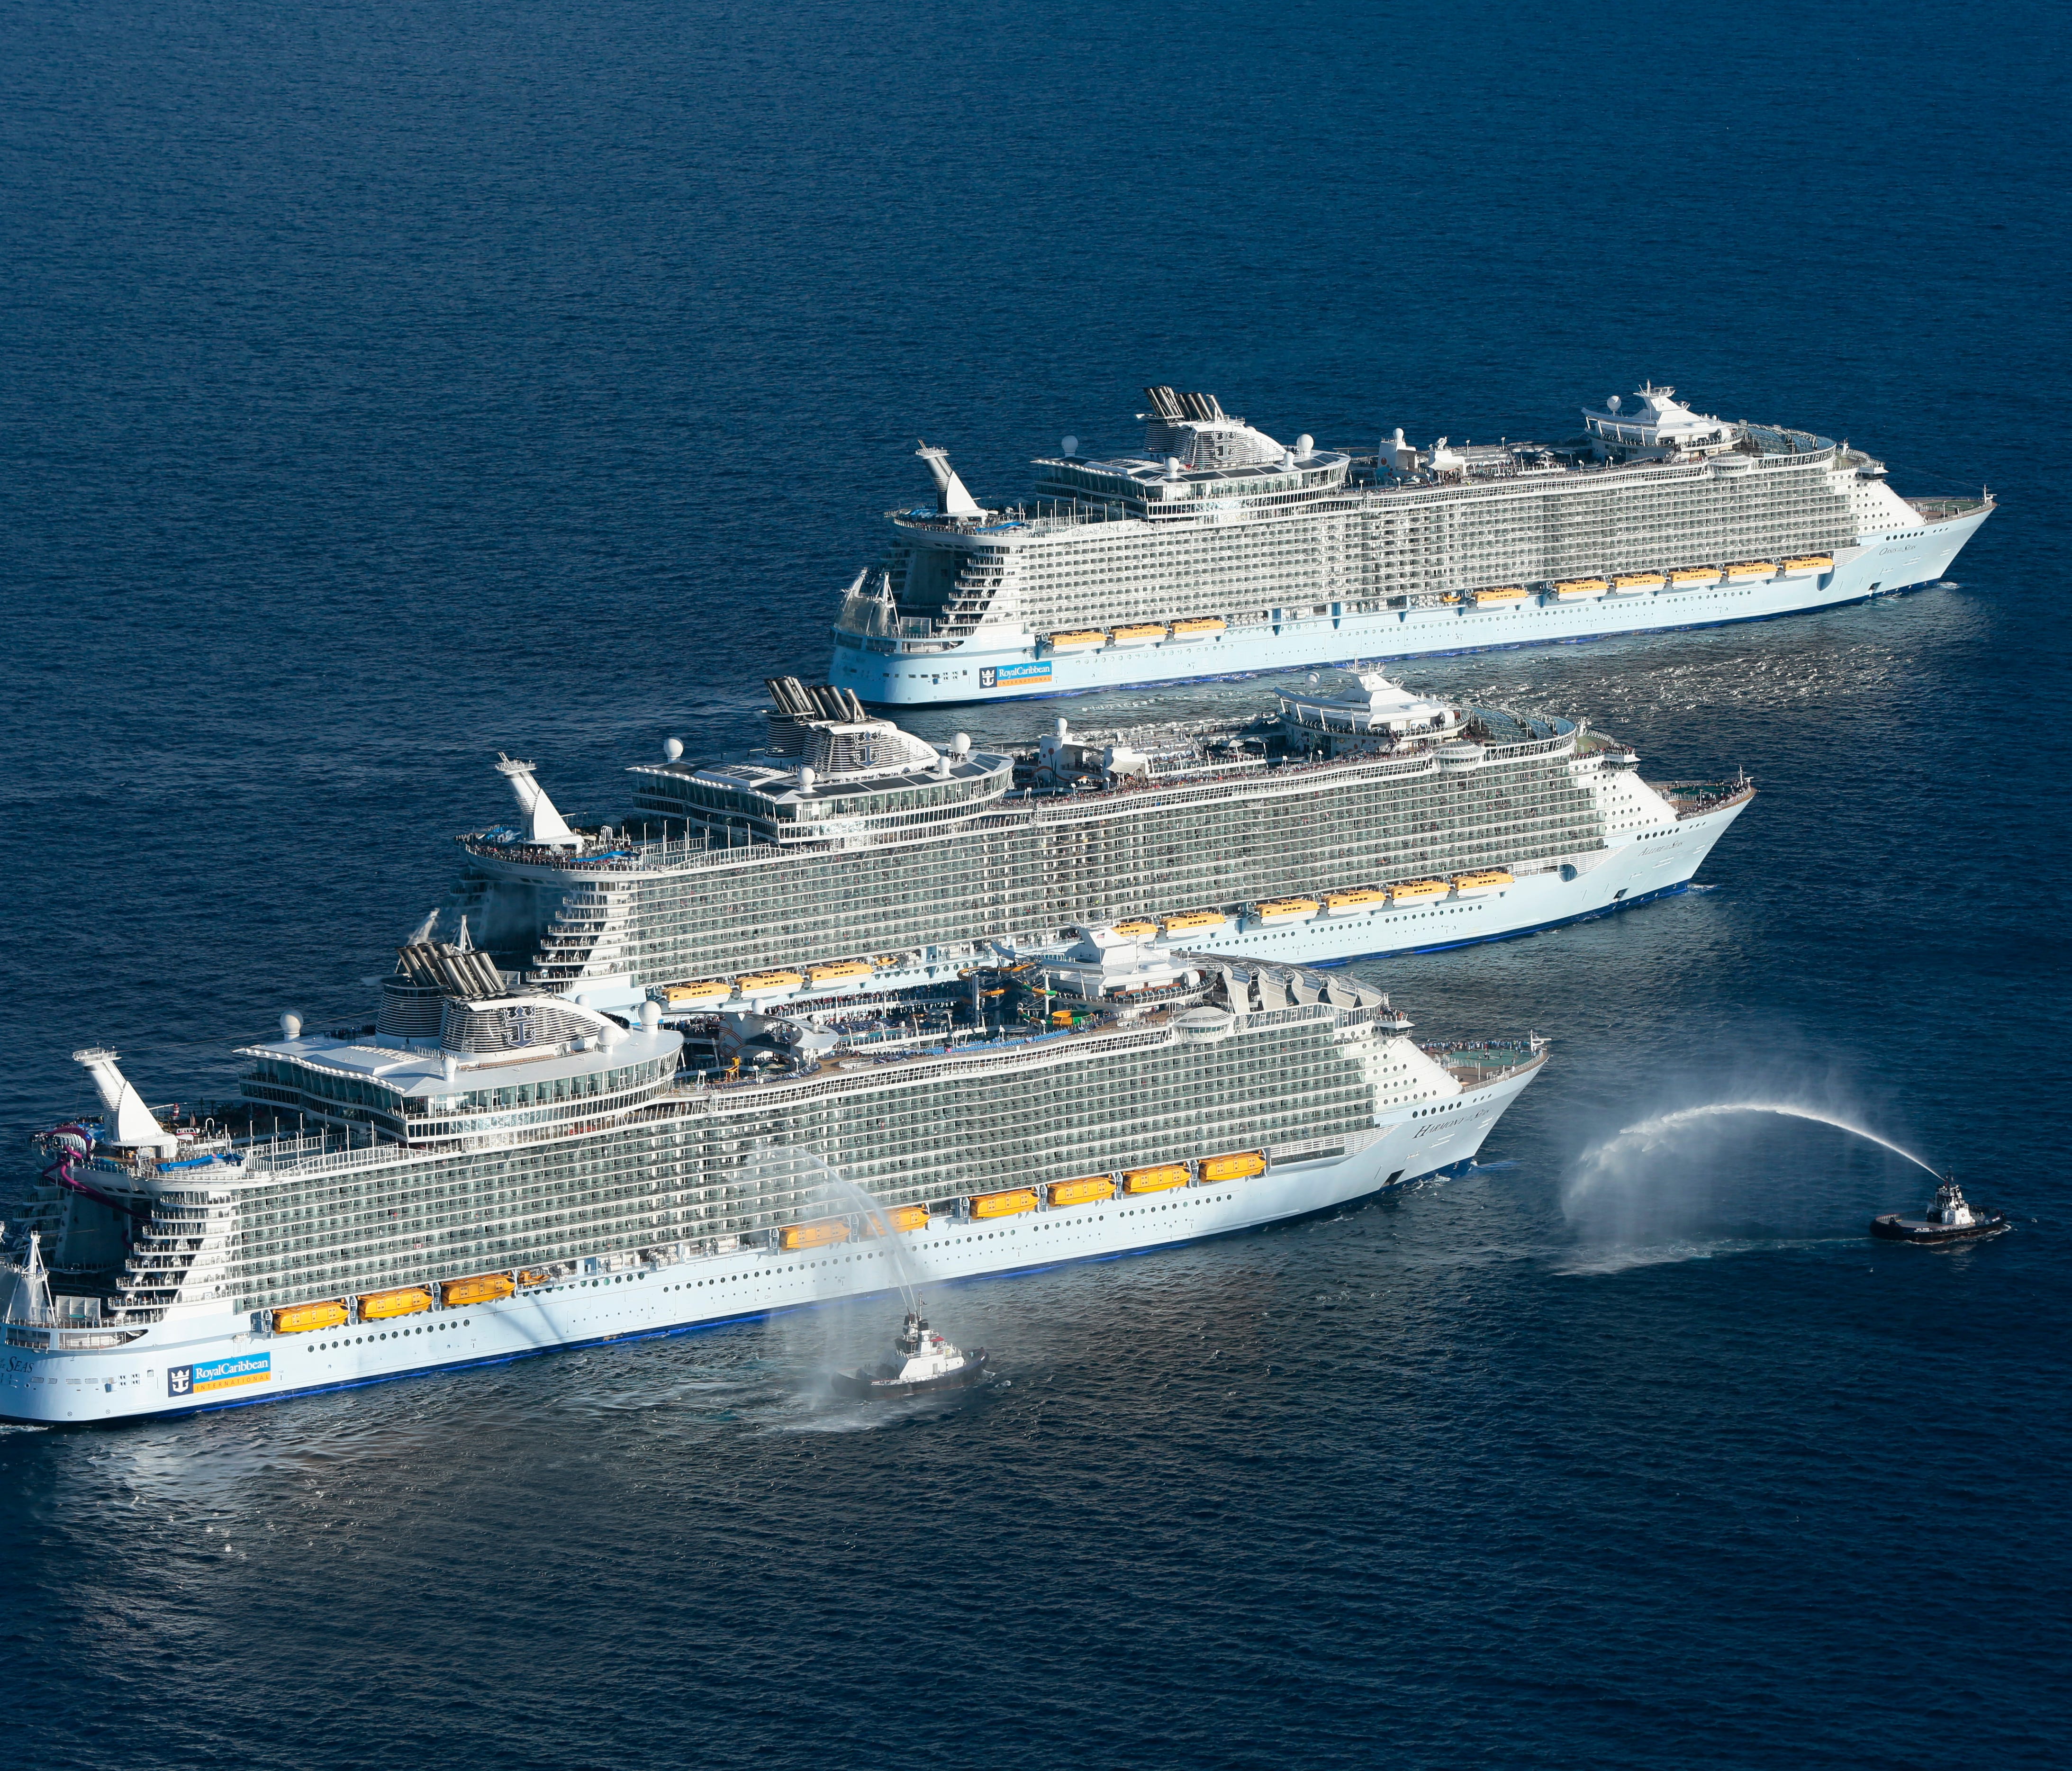 The world's three largest cruise ships -- Harmony of the Seas, Oasis of the Seas and Allure of the Seas -- met up for the first and perhaps only time off the coast of Florida on Nov. 4, 2016.